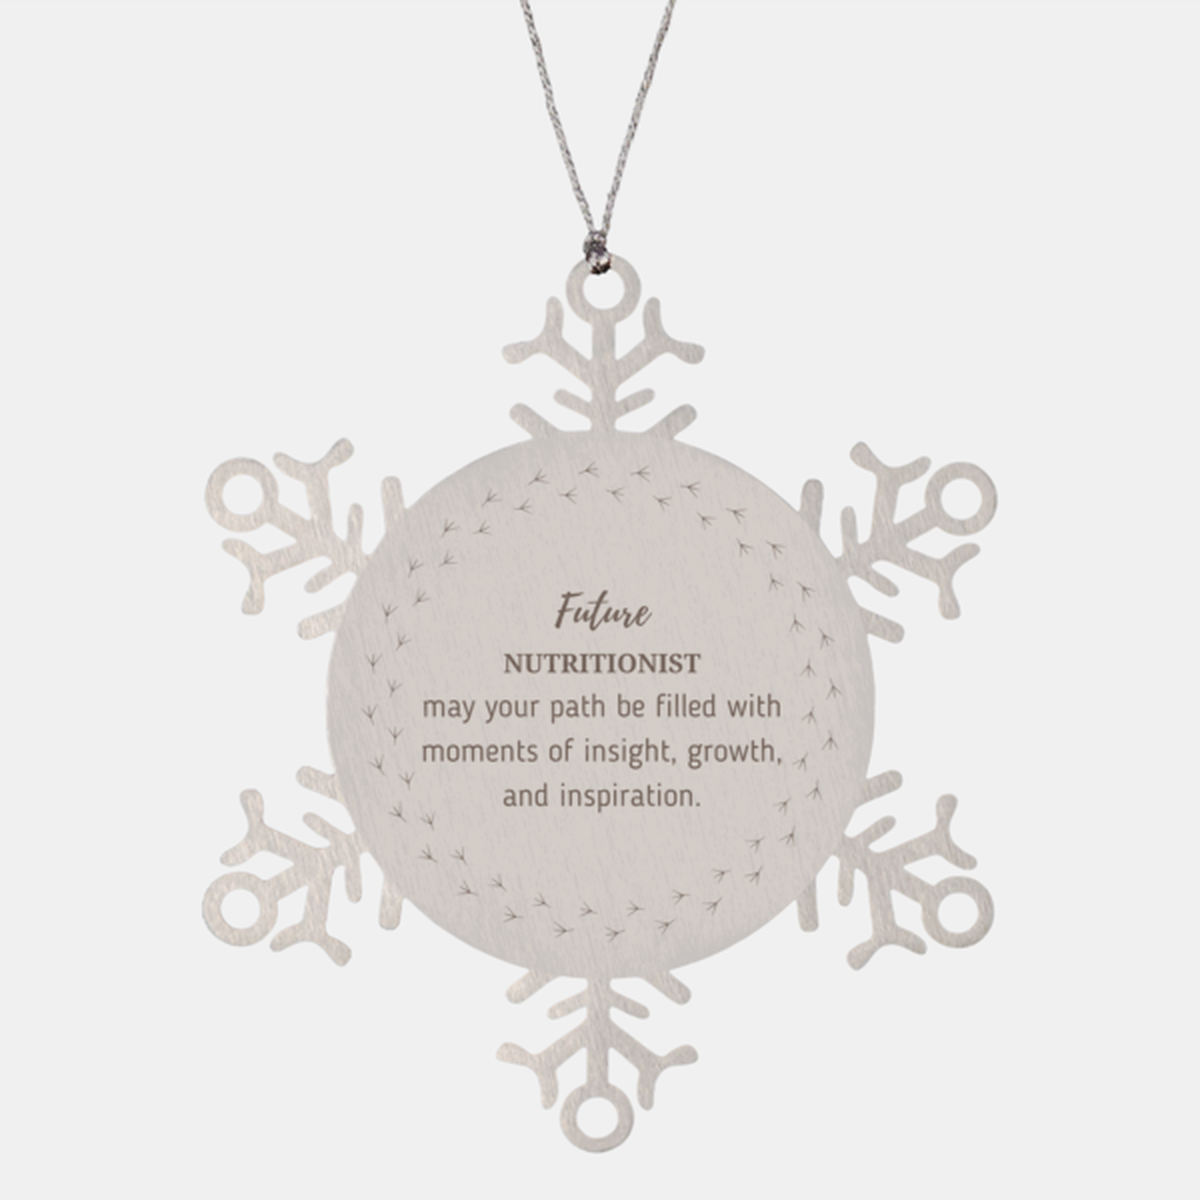 Future Nutritionist Gifts, May your path be filled with moments of insight, Graduation Gifts for New Nutritionist, Christmas Unique Snowflake Ornament For Men, Women, Friends